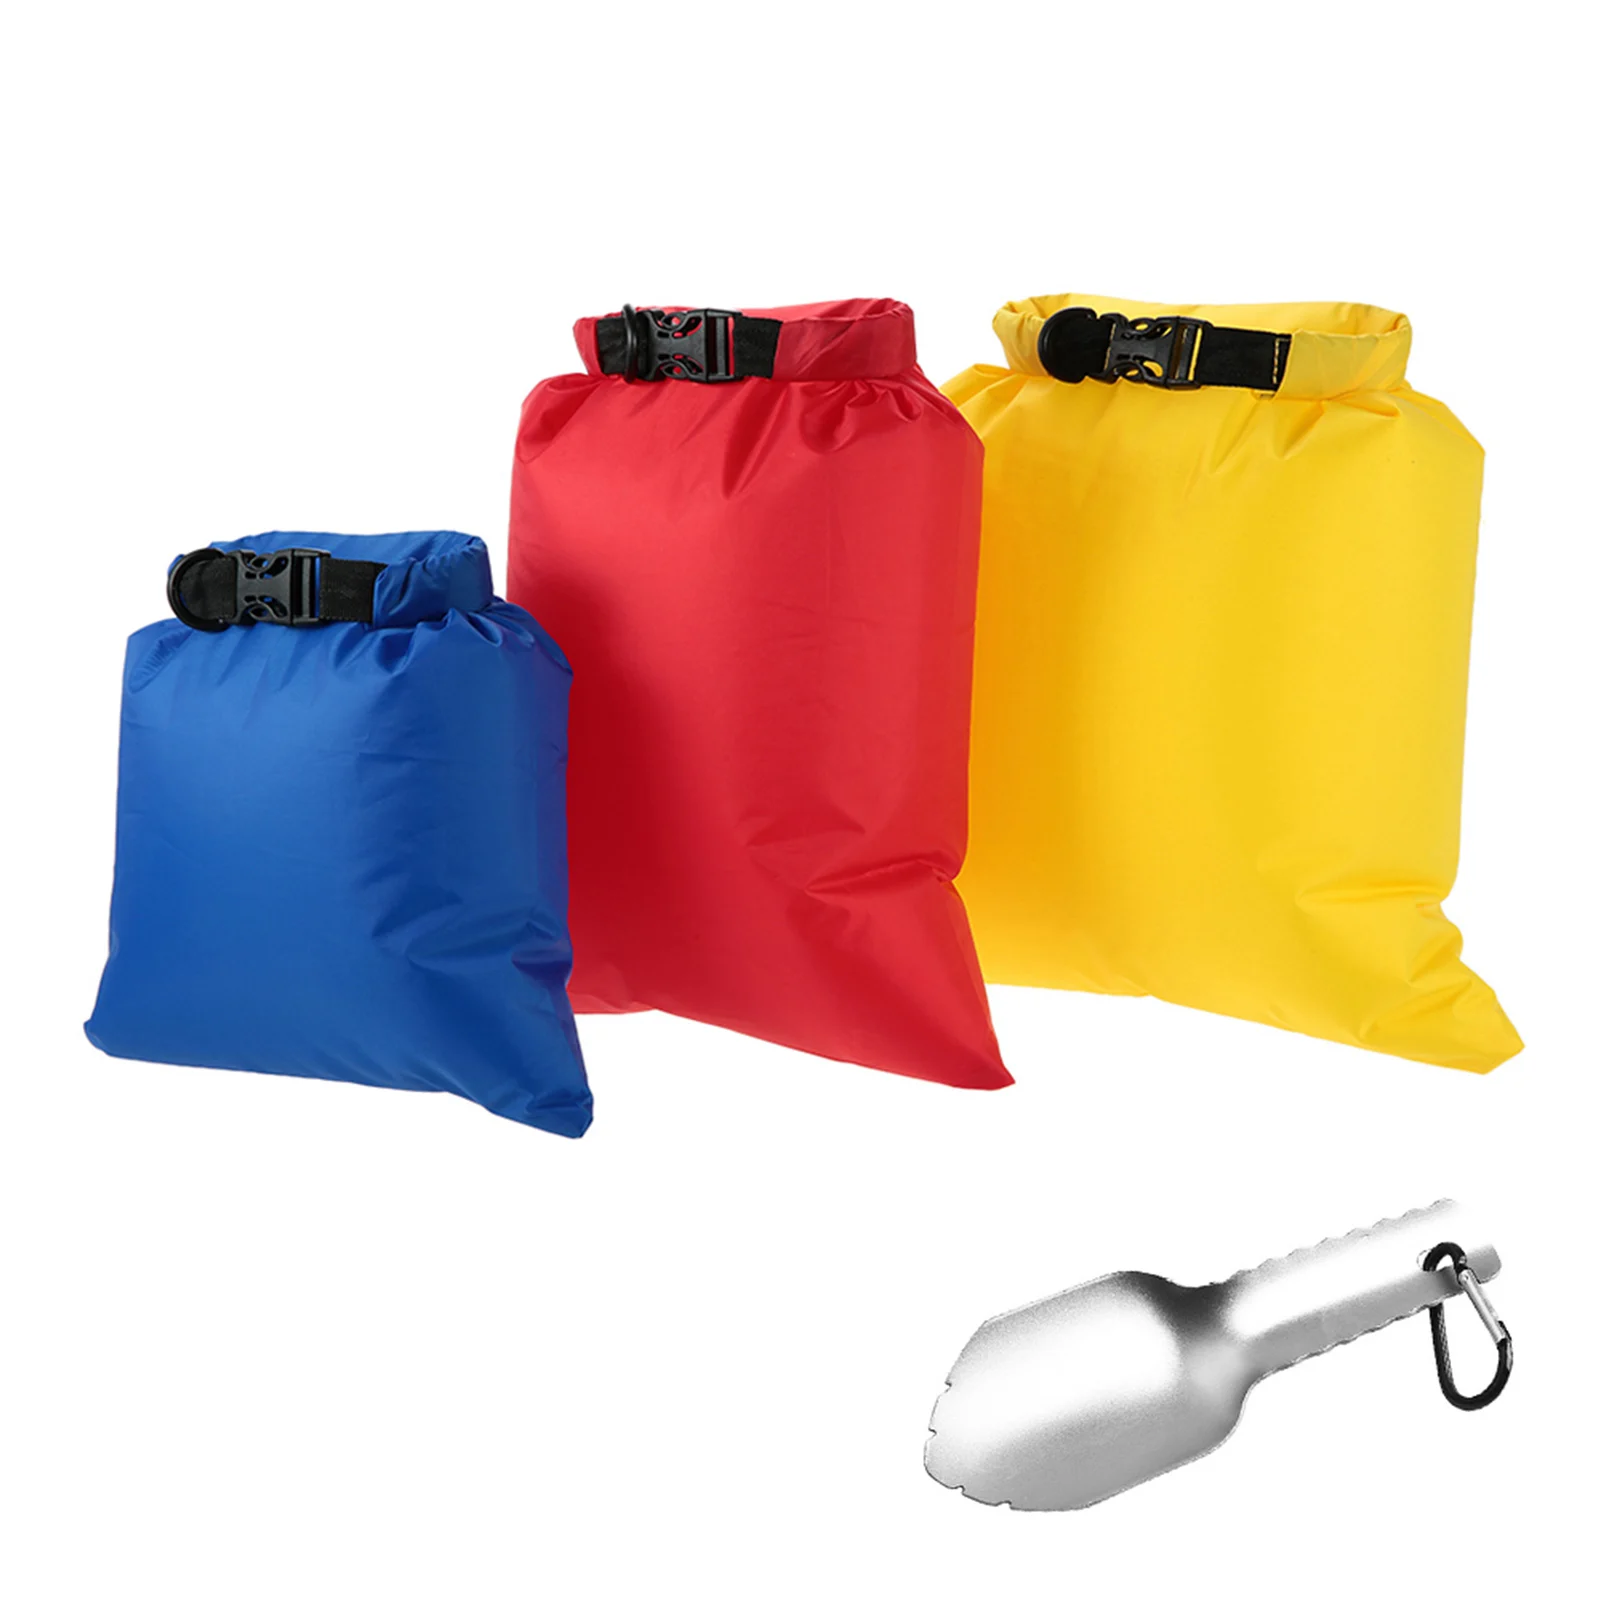 

3 Pcs Outdoor Camping Waterproof Bag 3L+5L+8L Ultralight Dry Sacks Bags with Hand Trowel Hiking Traveling Accessories